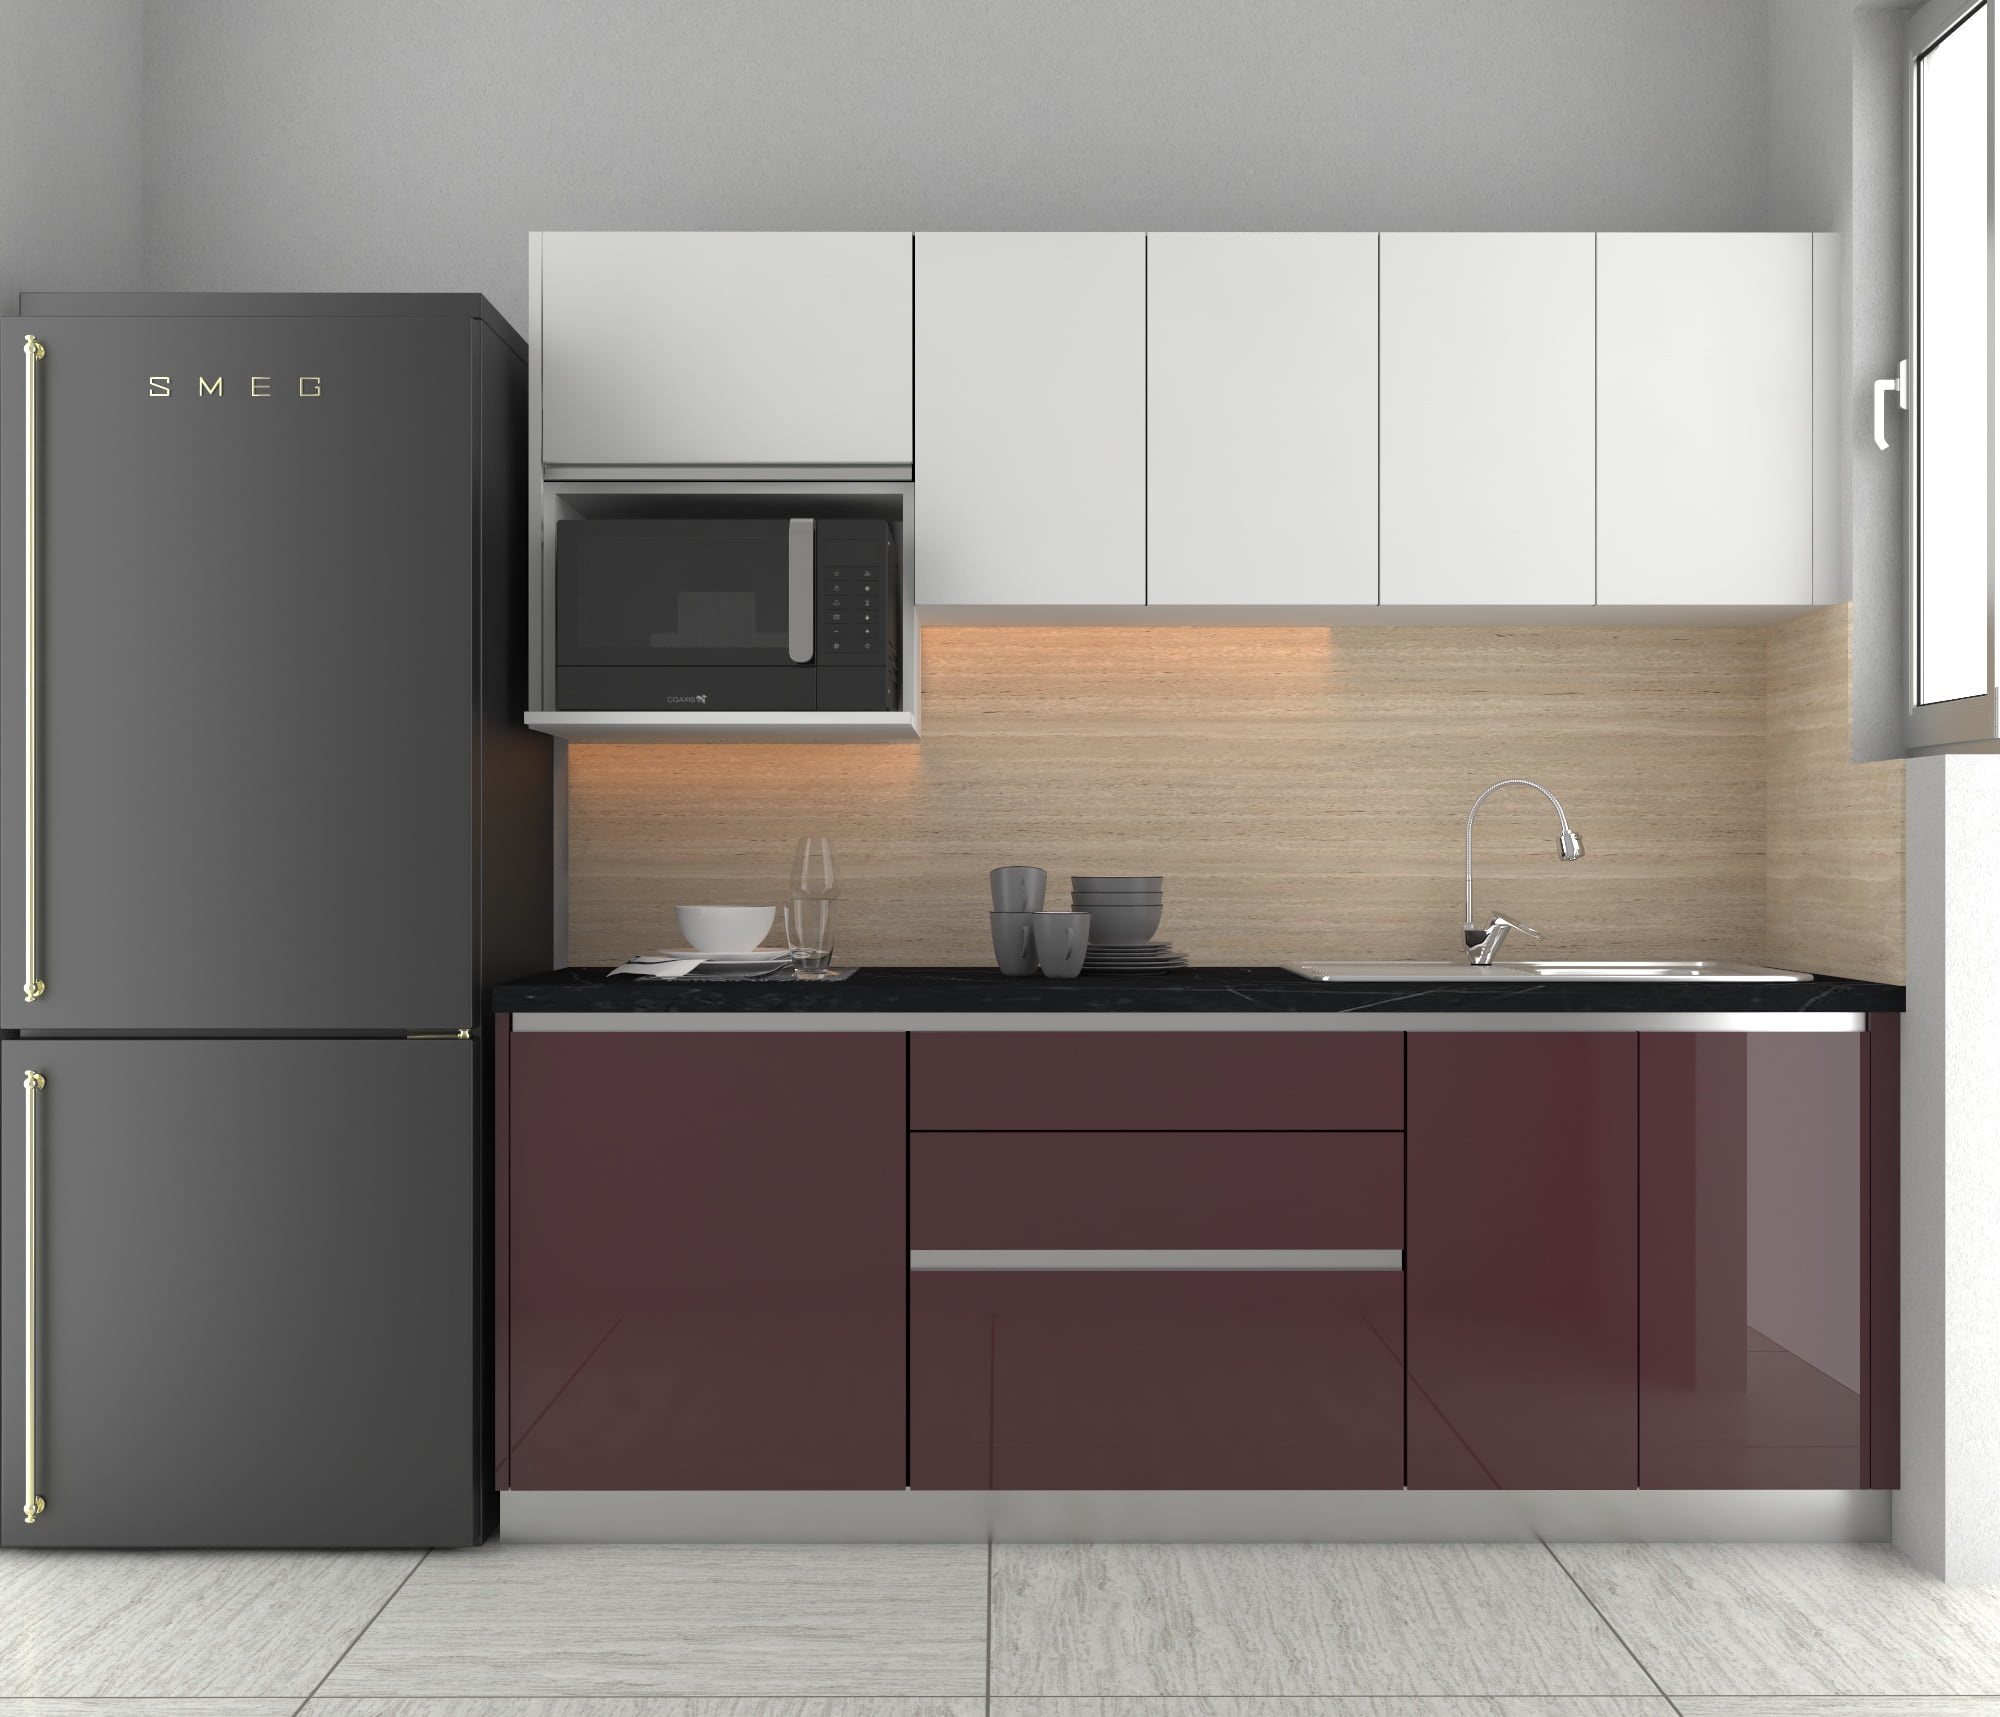 In this image in Line modular Kitchen